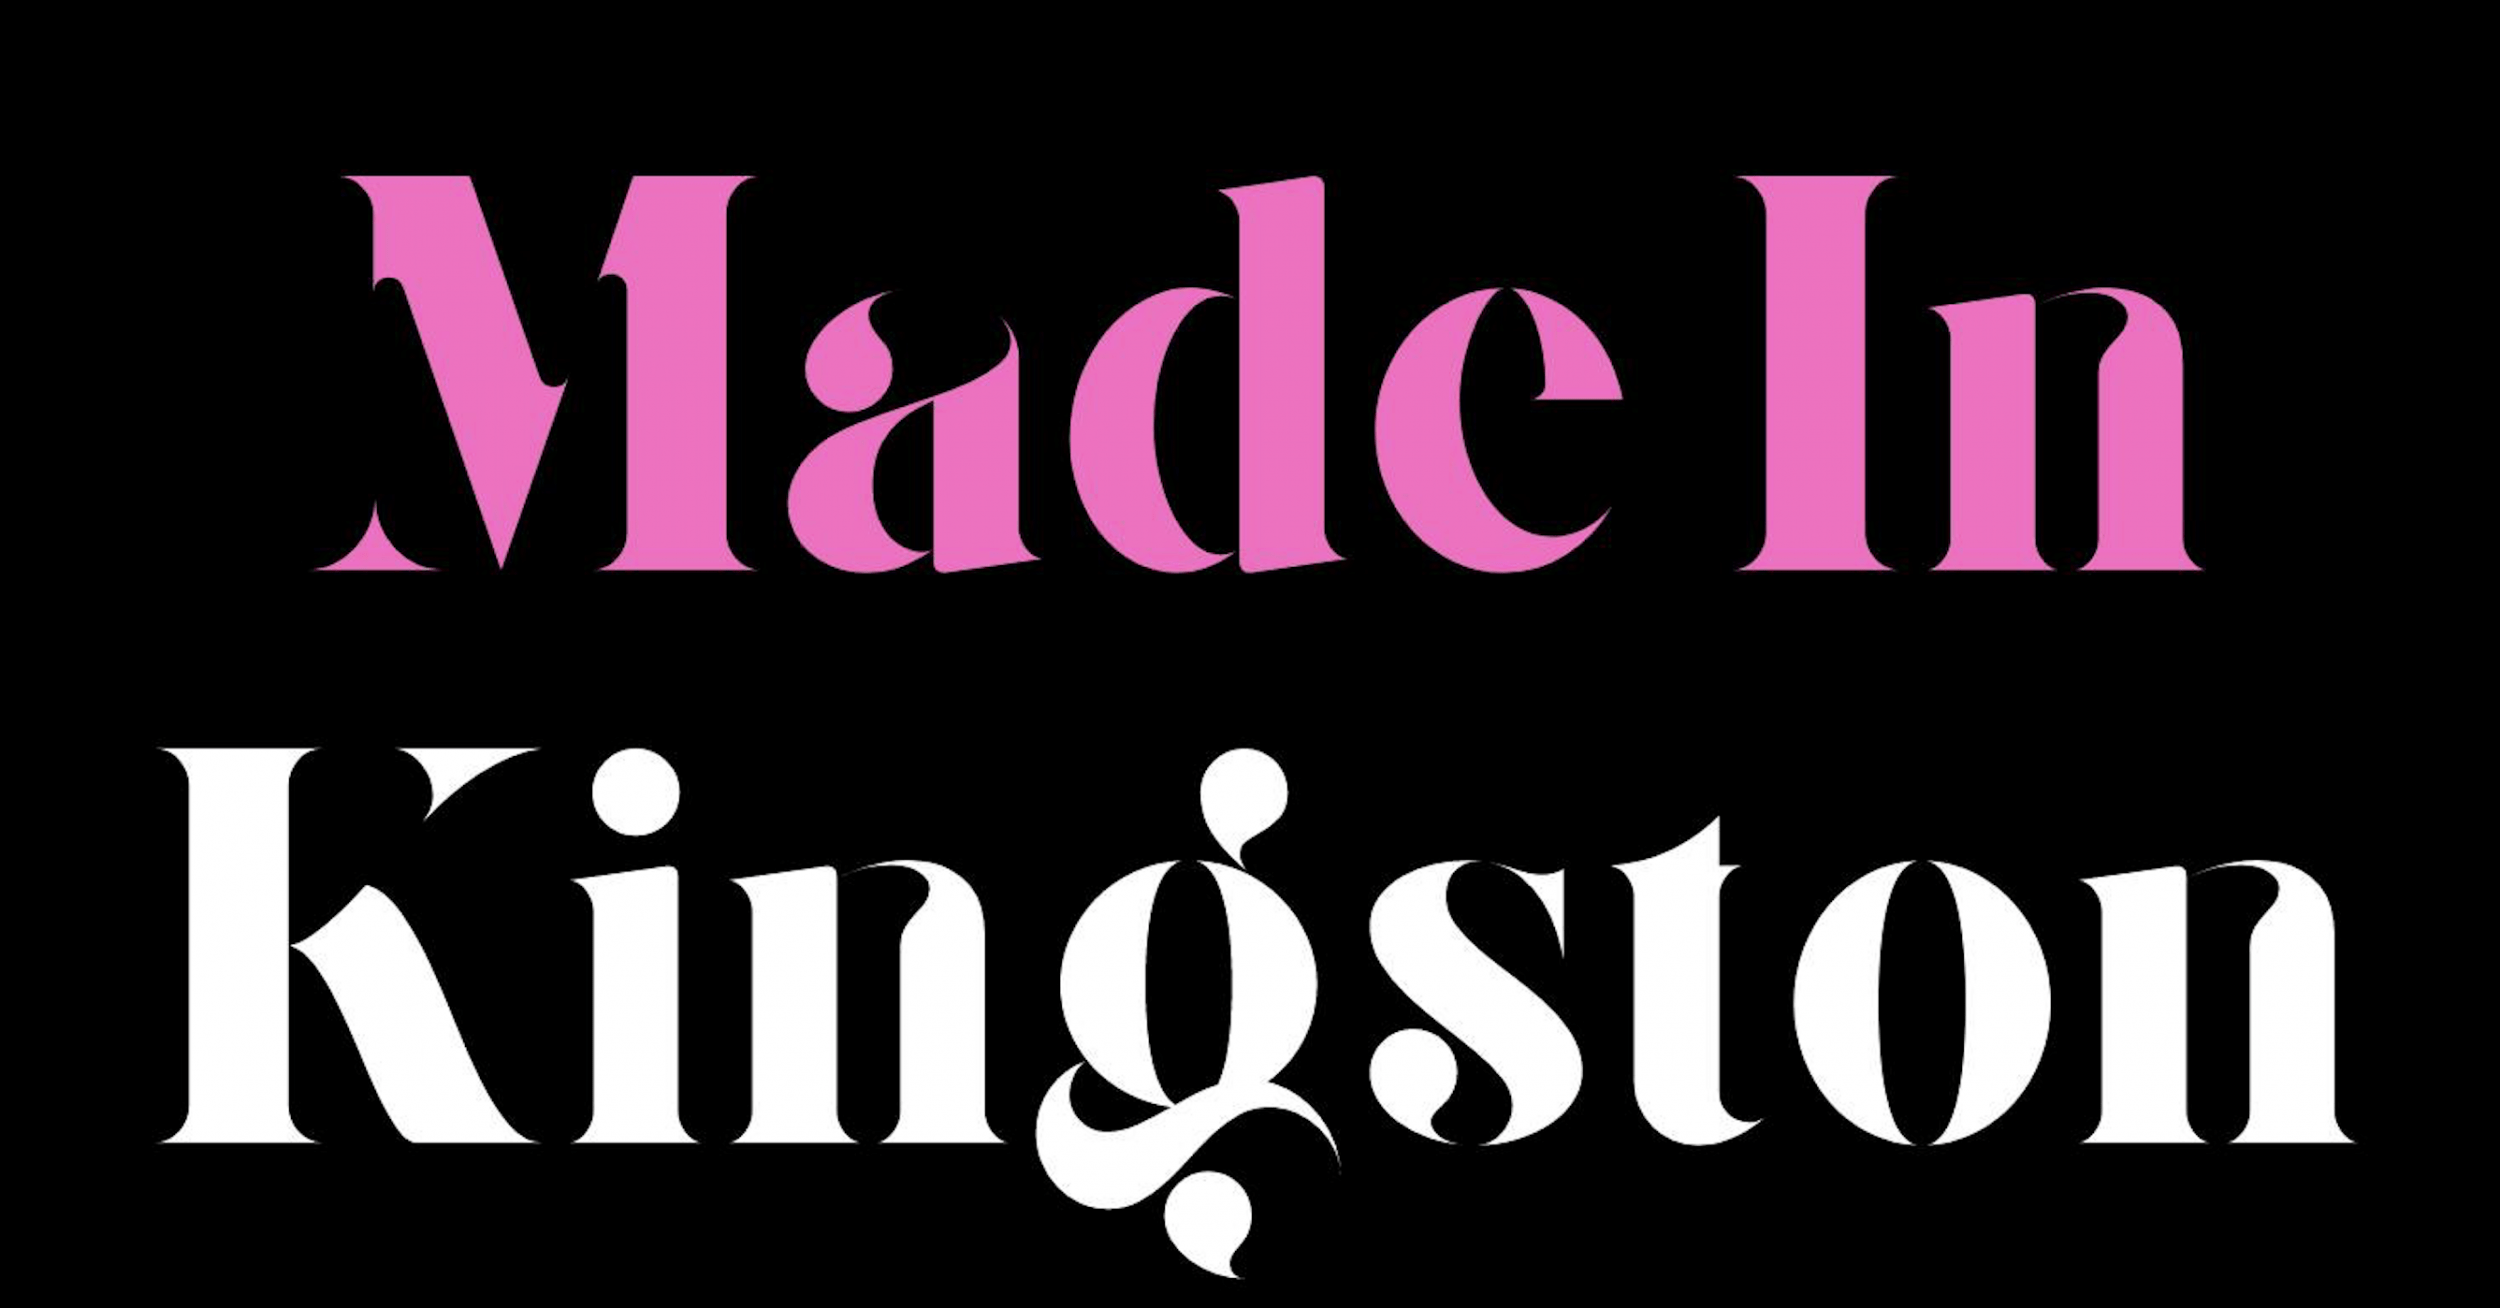 Introducing: ‘Made in Kingston’